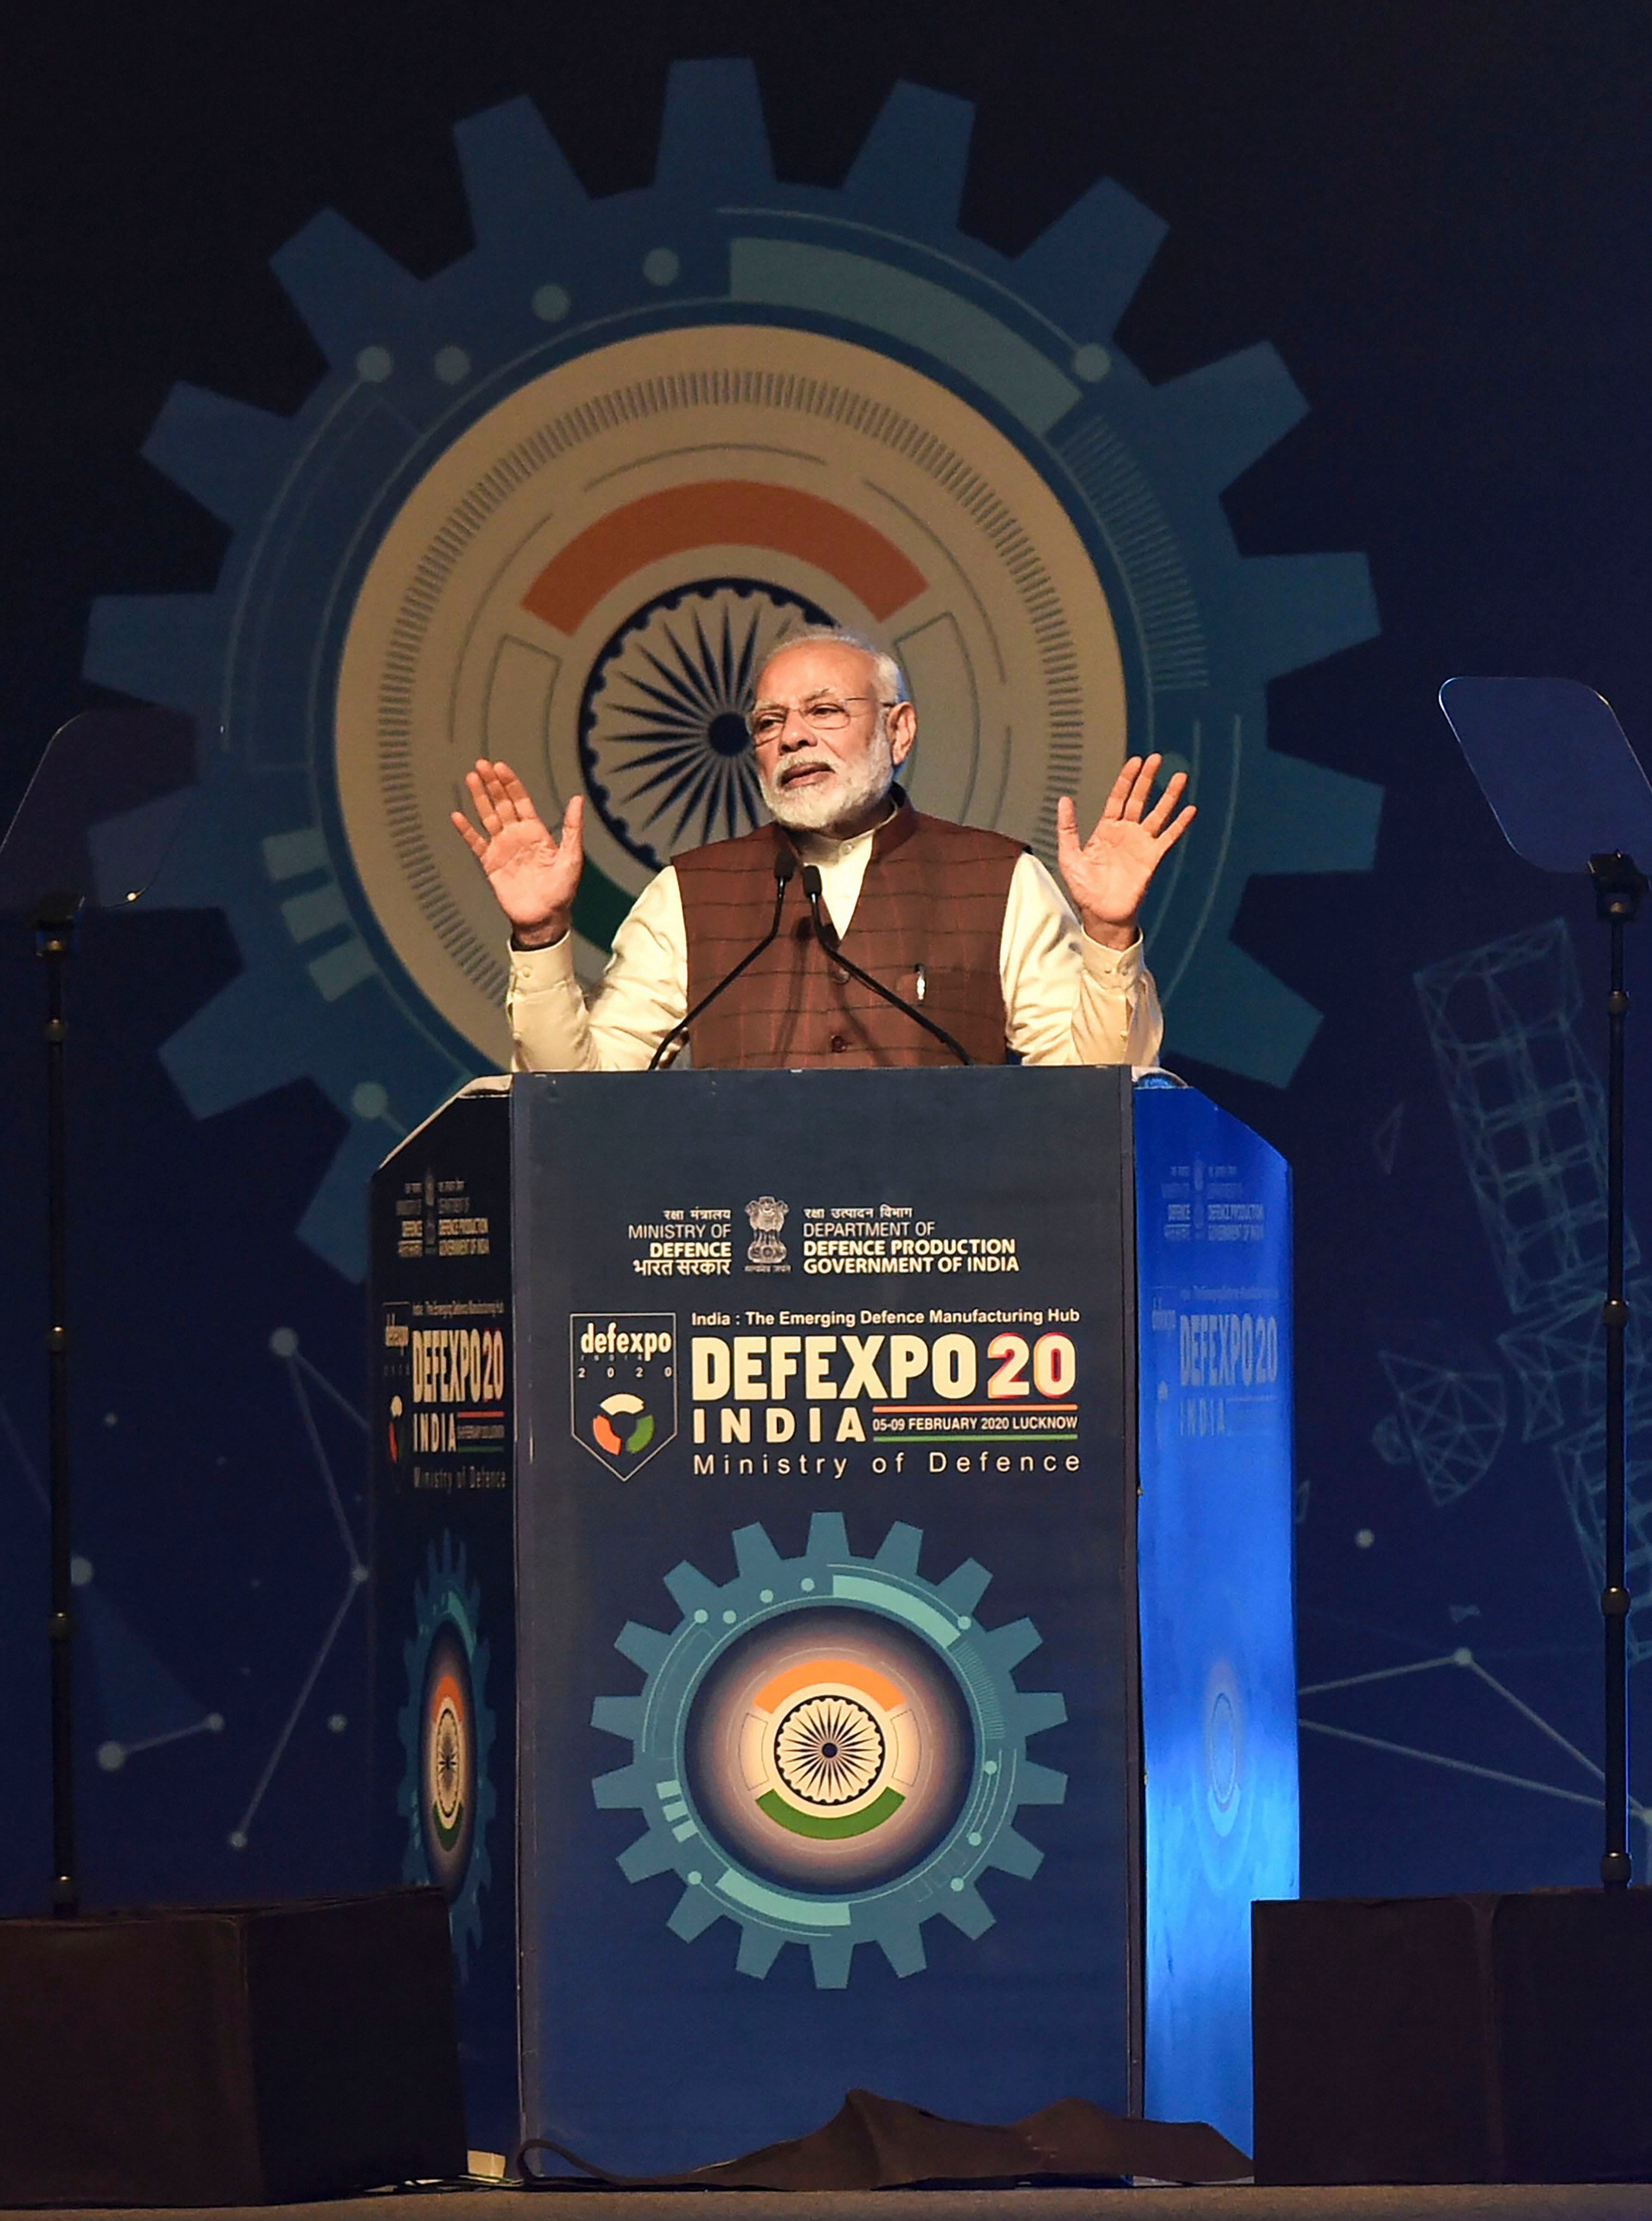 The prime minister said India's presence in outer space is already strong and will get stronger in the coming years. (Credit: PTI Photo)